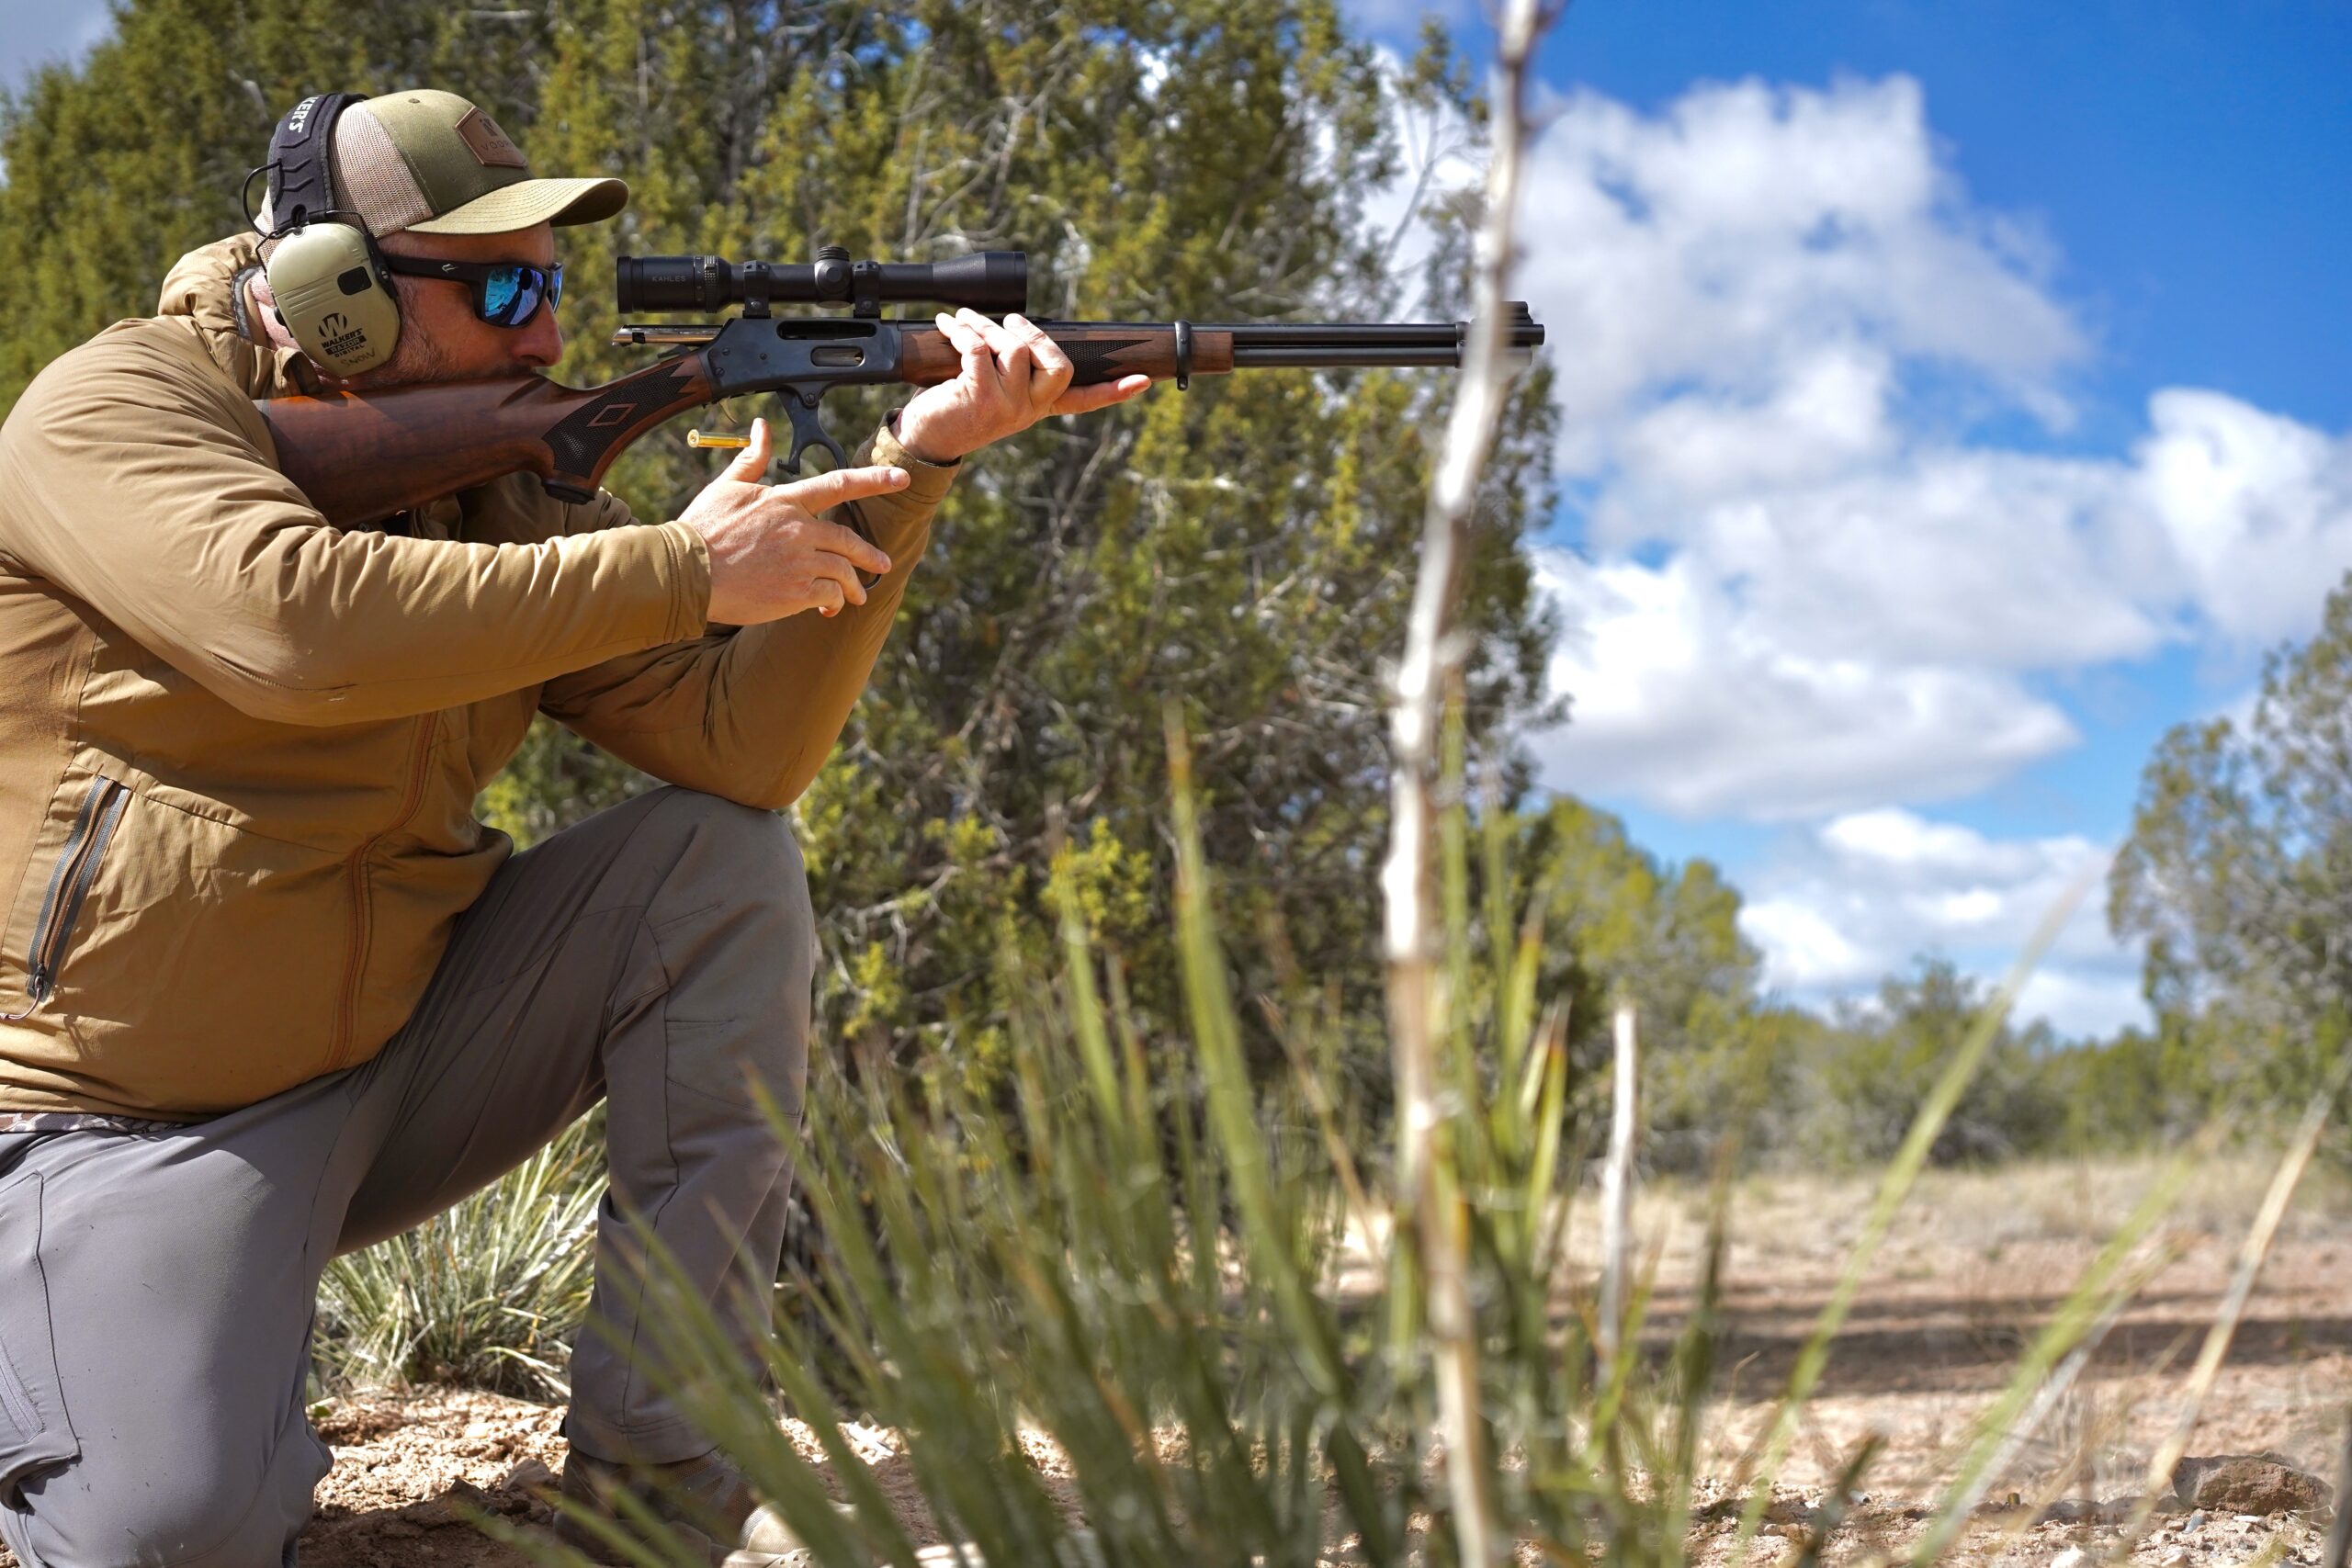 The Marlin 336 Classic in action.